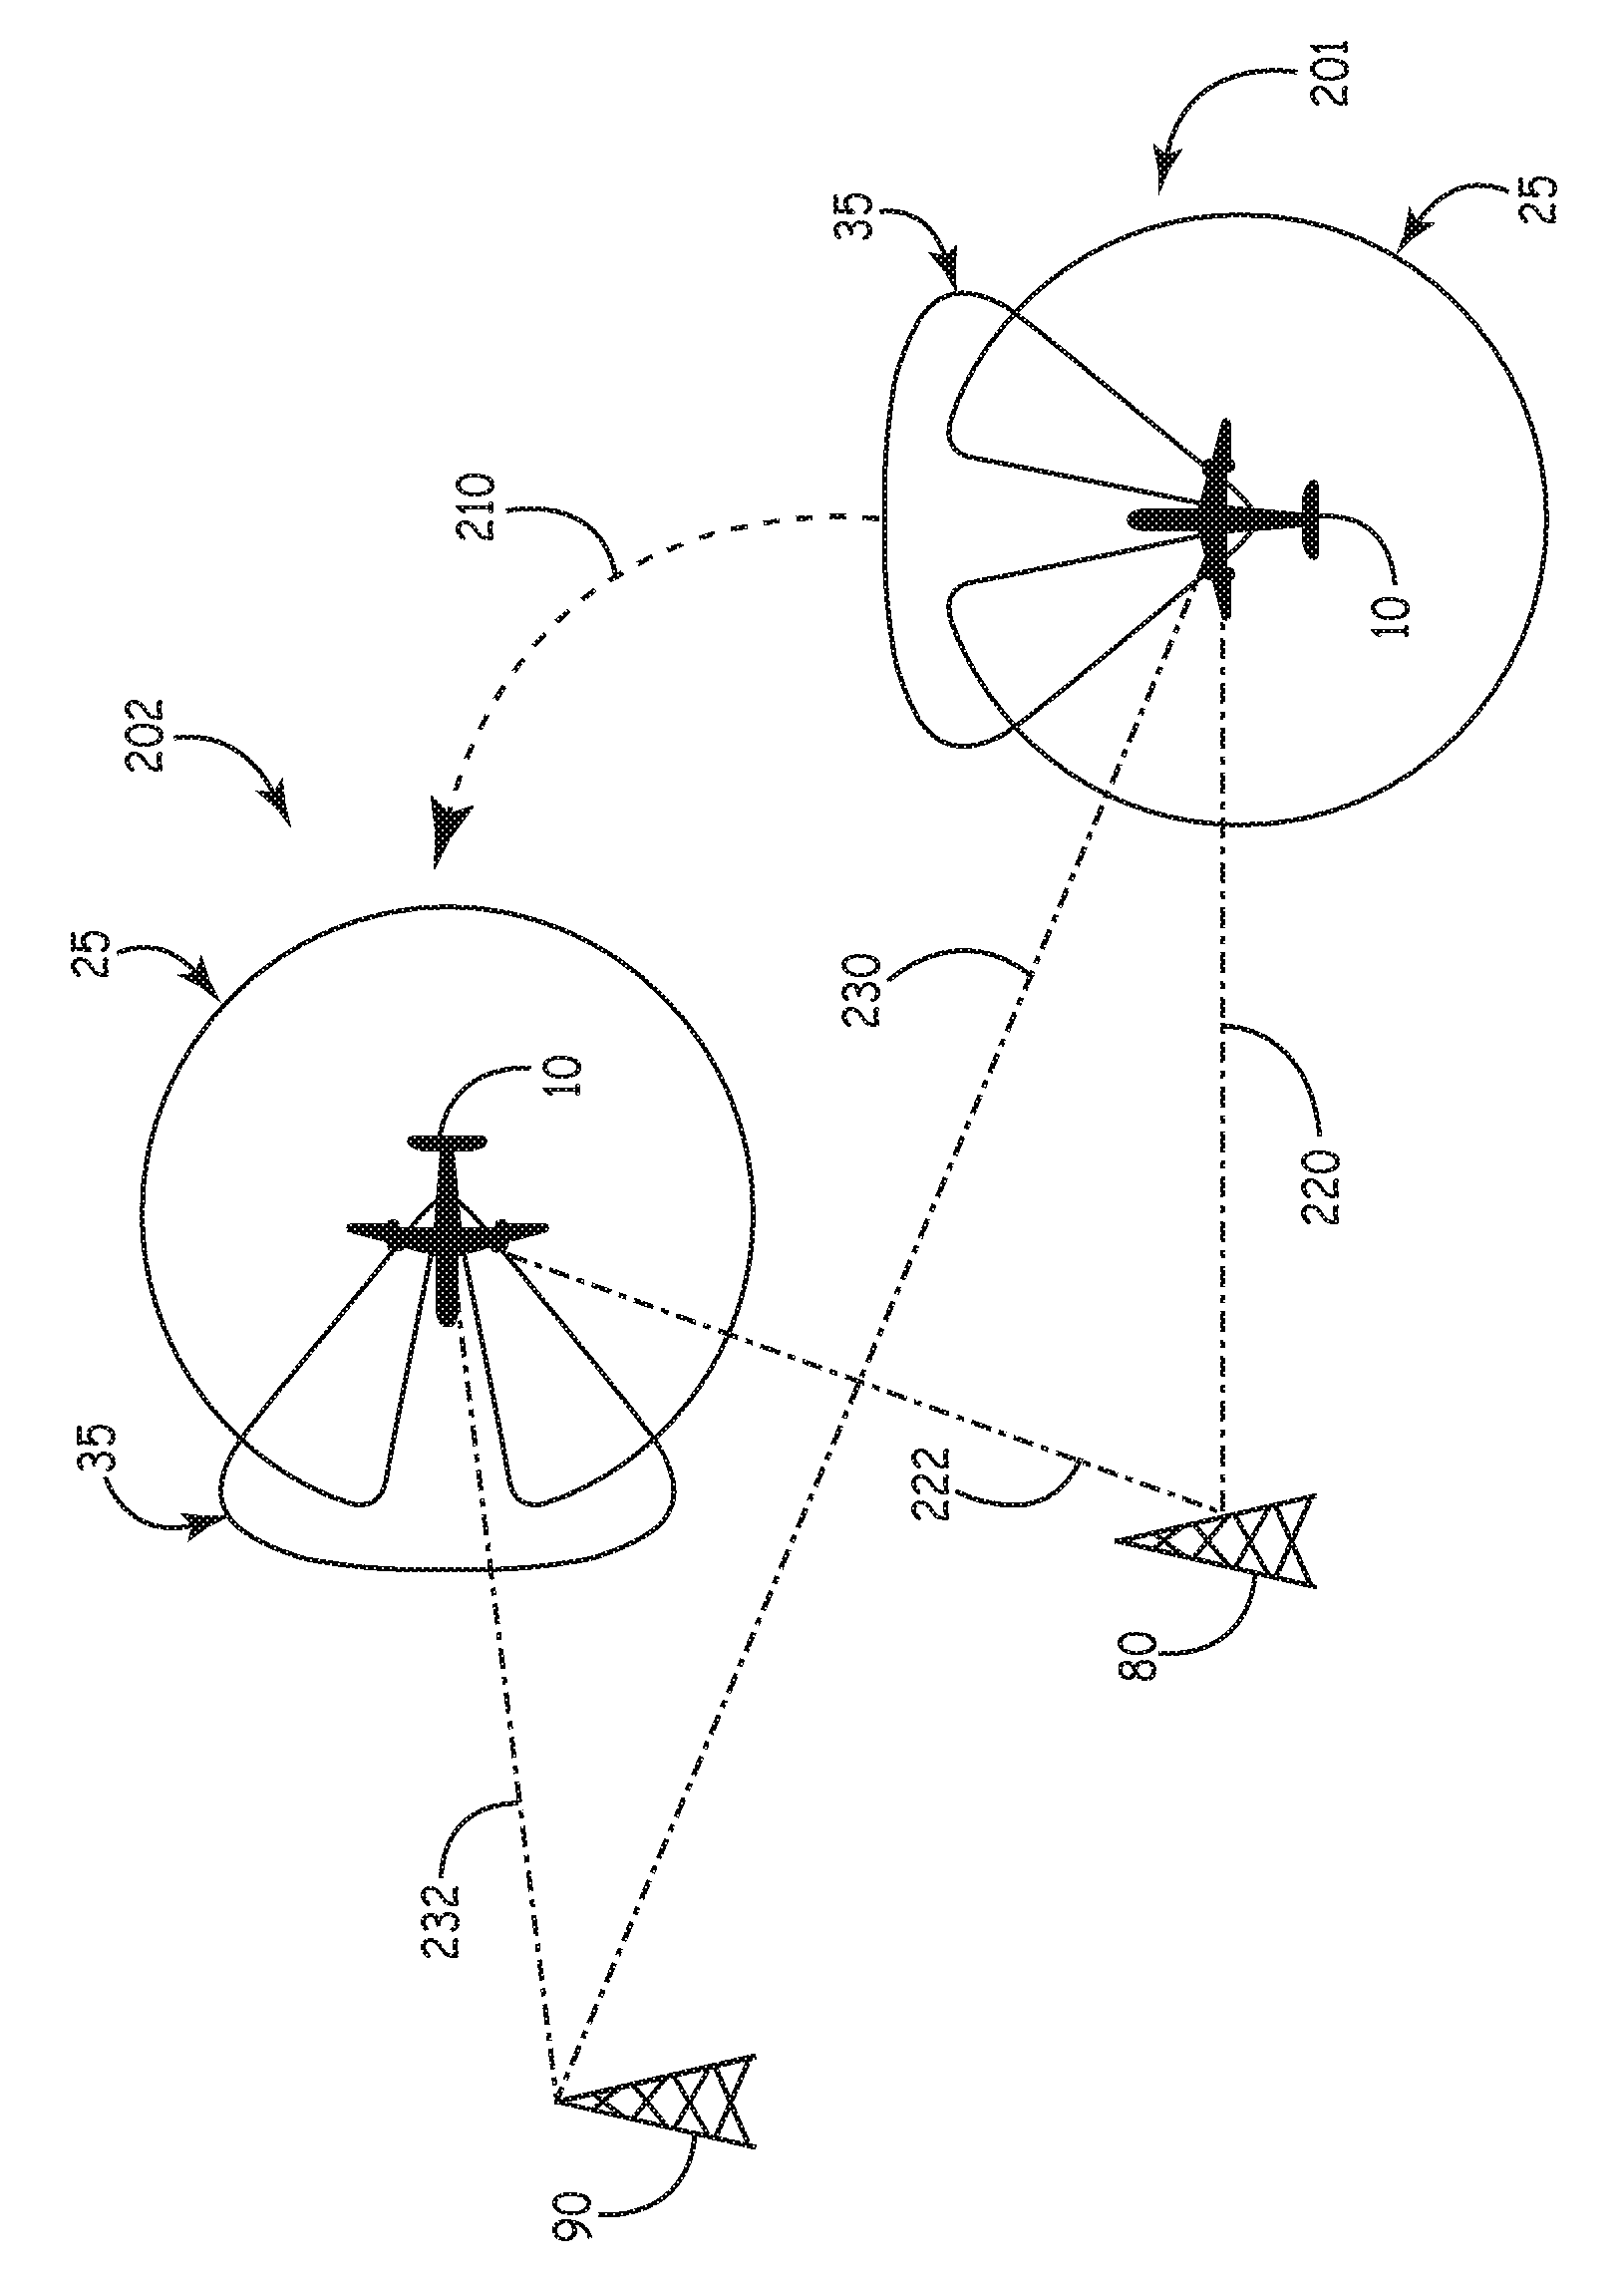 Systems and methods for the selection of antennas in aircraft navigation systems